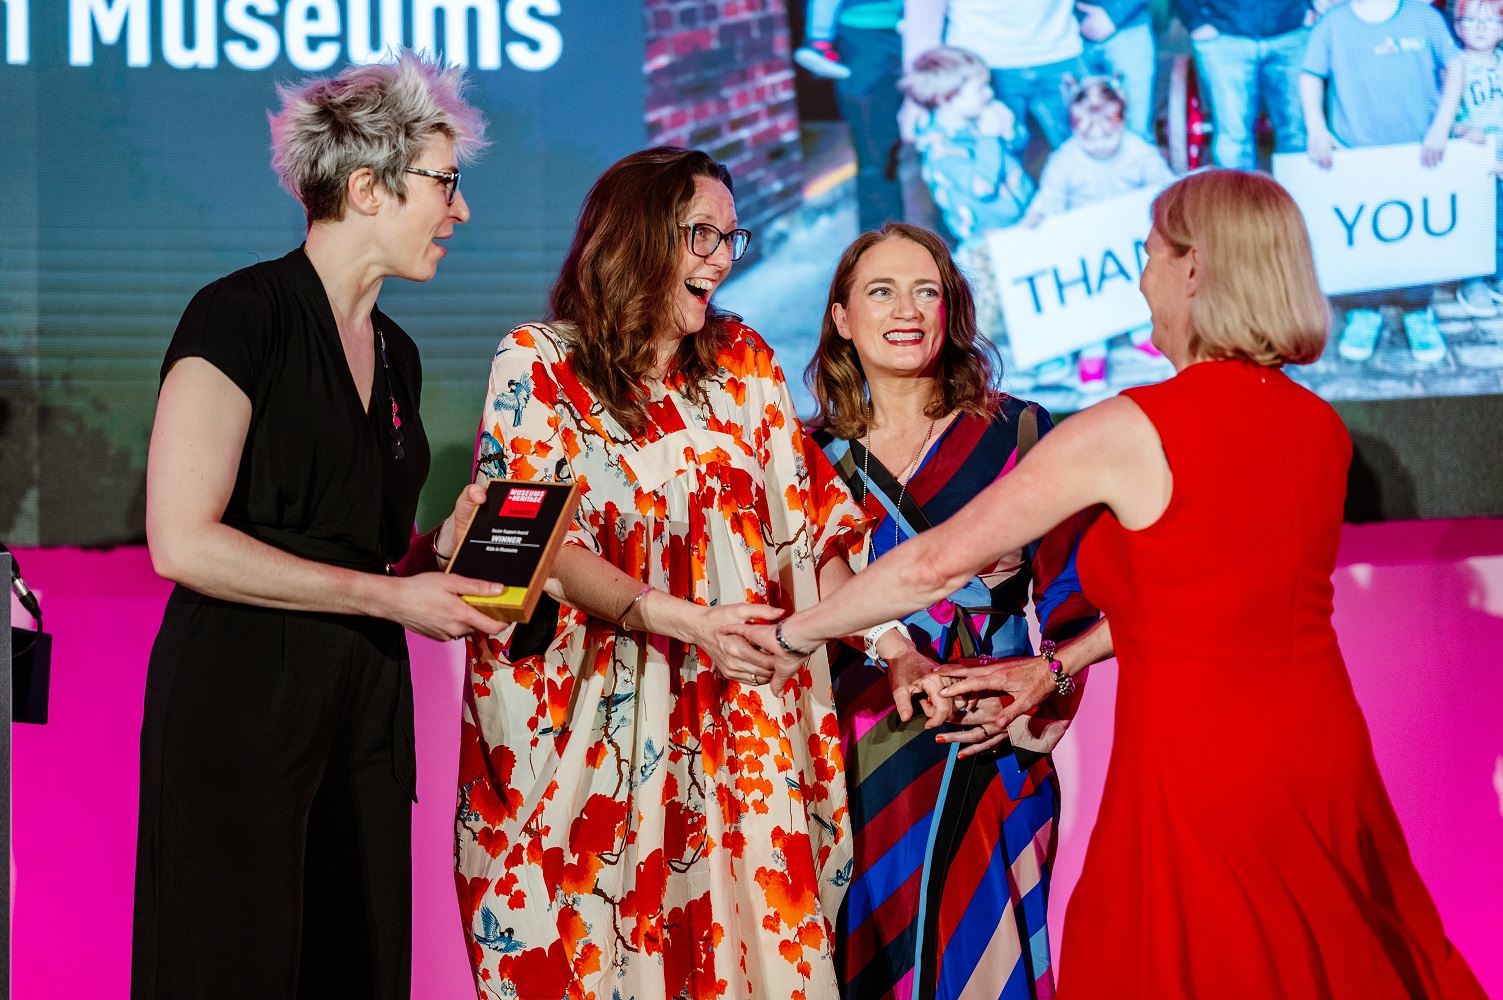 Four women, host Iszi Lawrence and three Kids in Museums trustees, all smiling and wearing dresses stand on stage at the M+H Awards ceremony. Two women hold hands and look delighted, while Iszi holds the Sector Support Award.